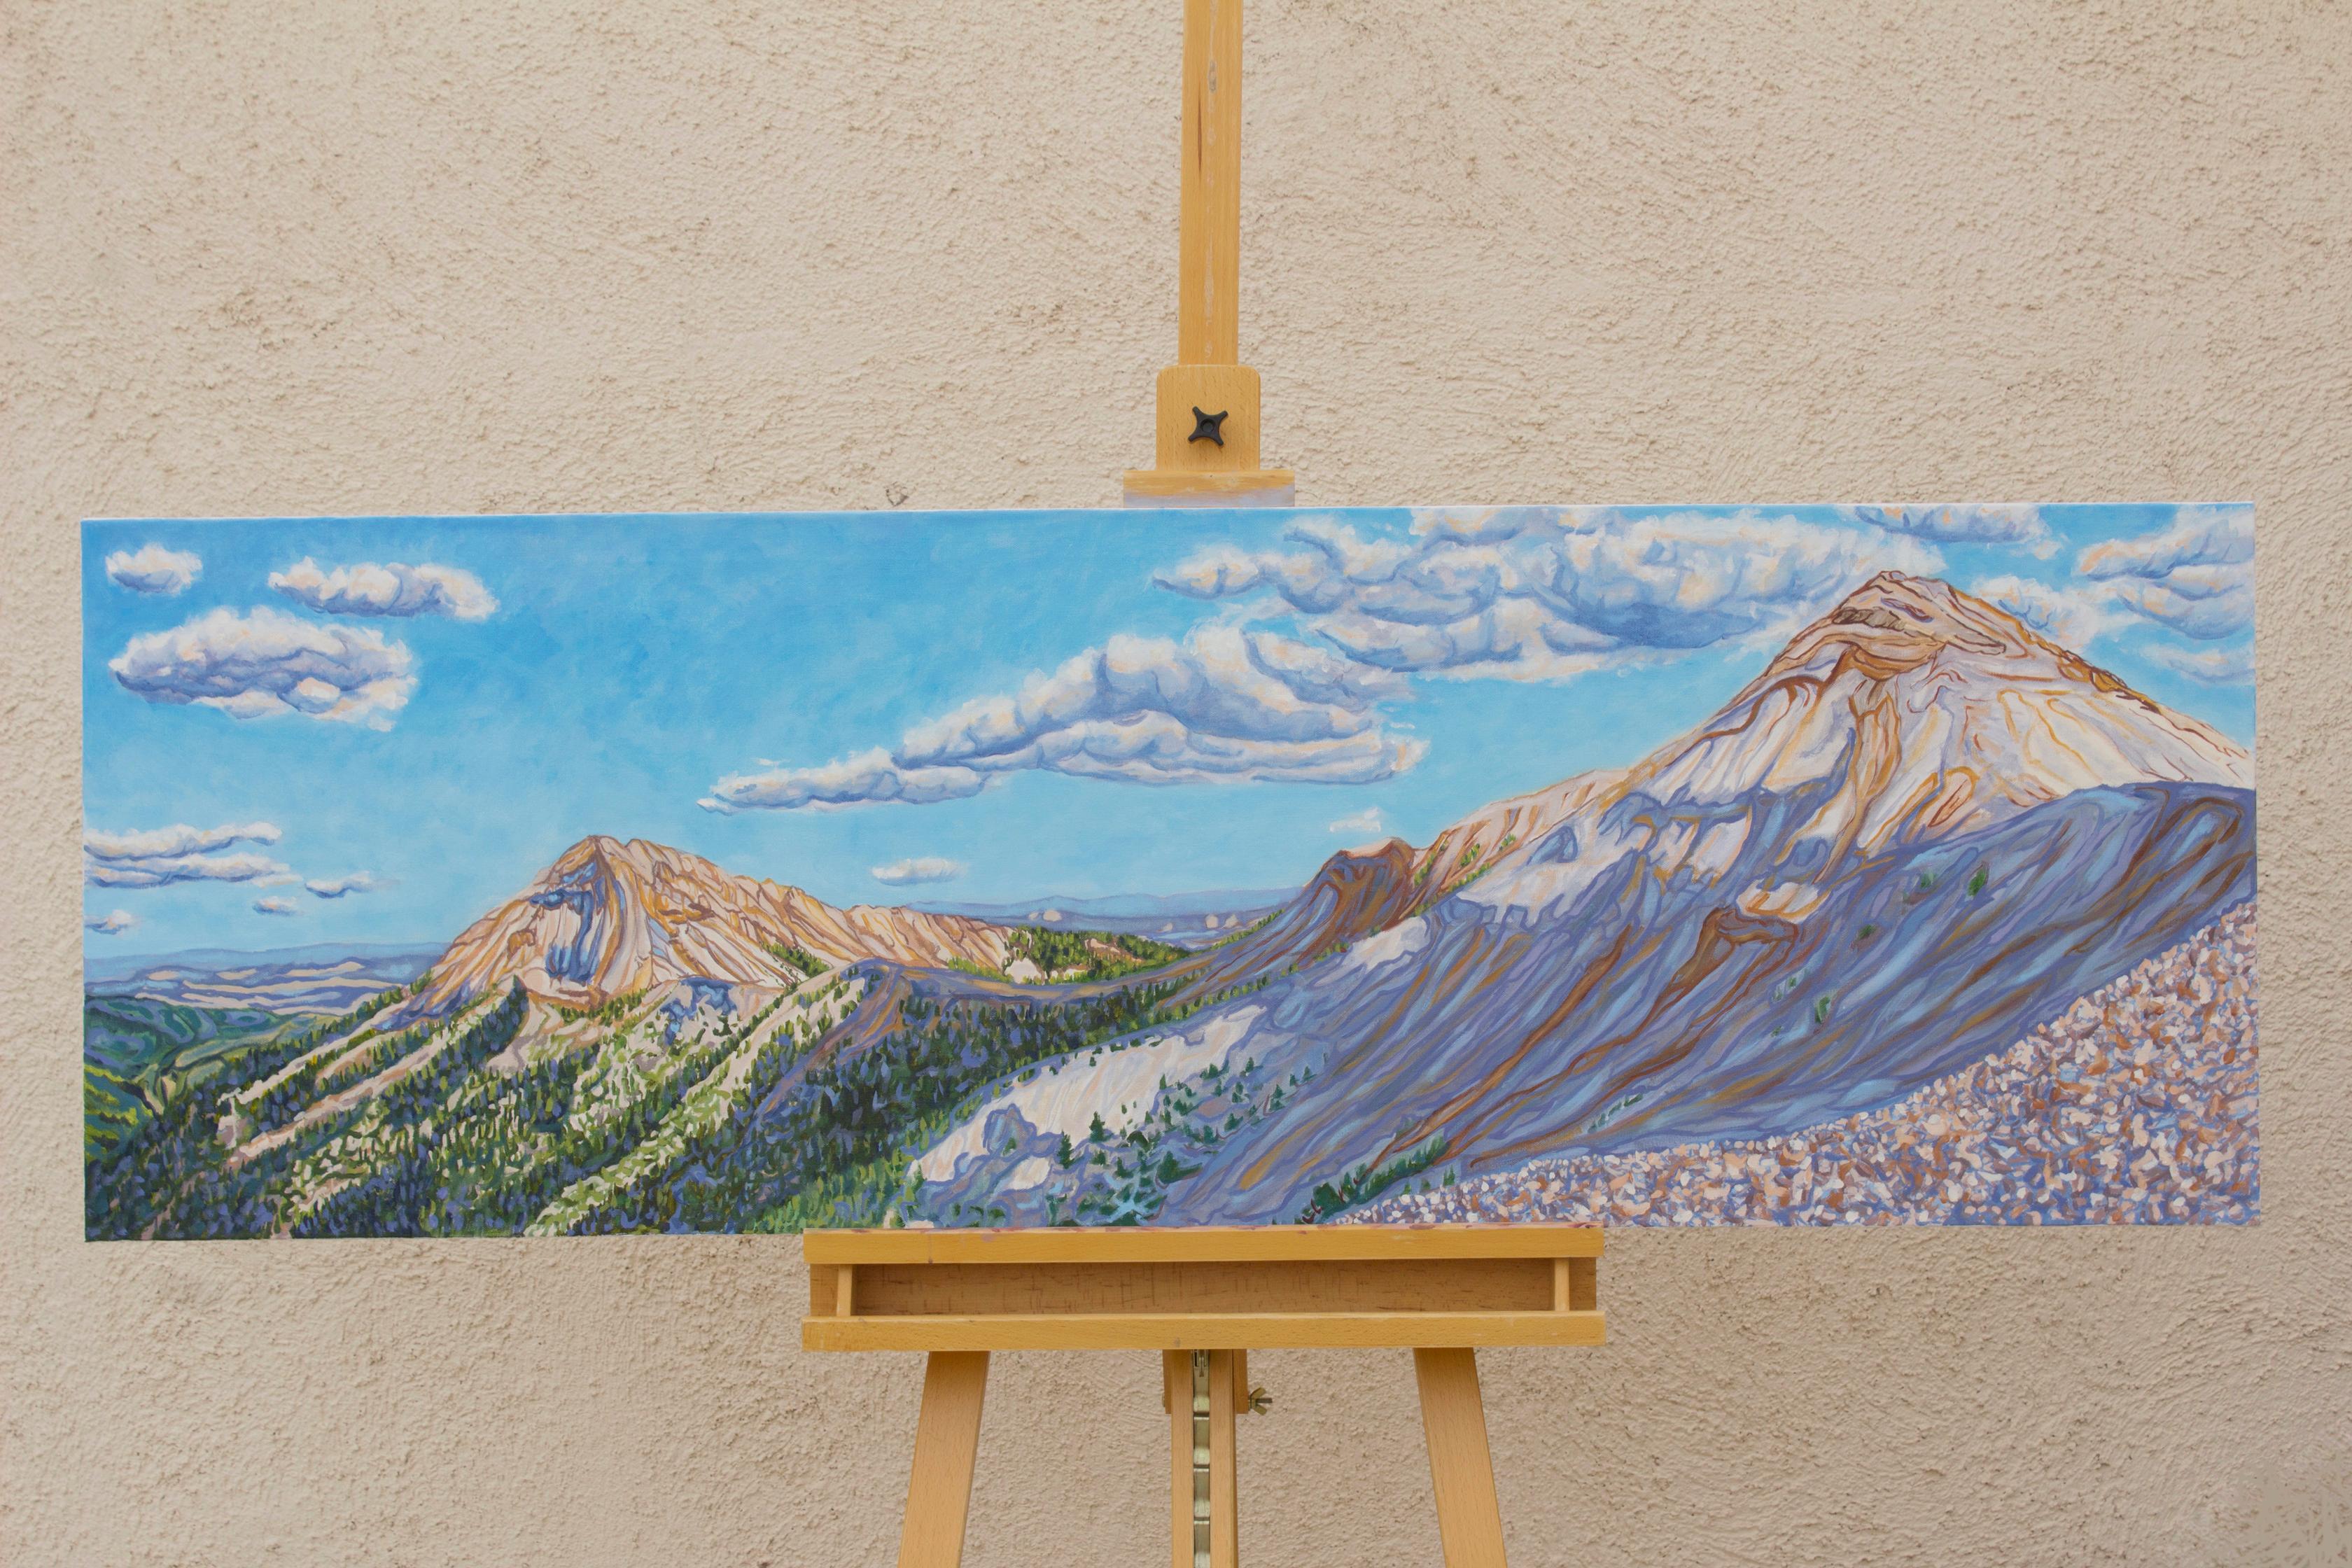 <p>Artist Comments<br /> This piece was inspired by a hike on a stunning ridge leading to two prominent peaks in the Tushar Mountains. I was dealing with an injury, and the shadowed peaks seemed symbolic of the obstacles I was facing. At the same